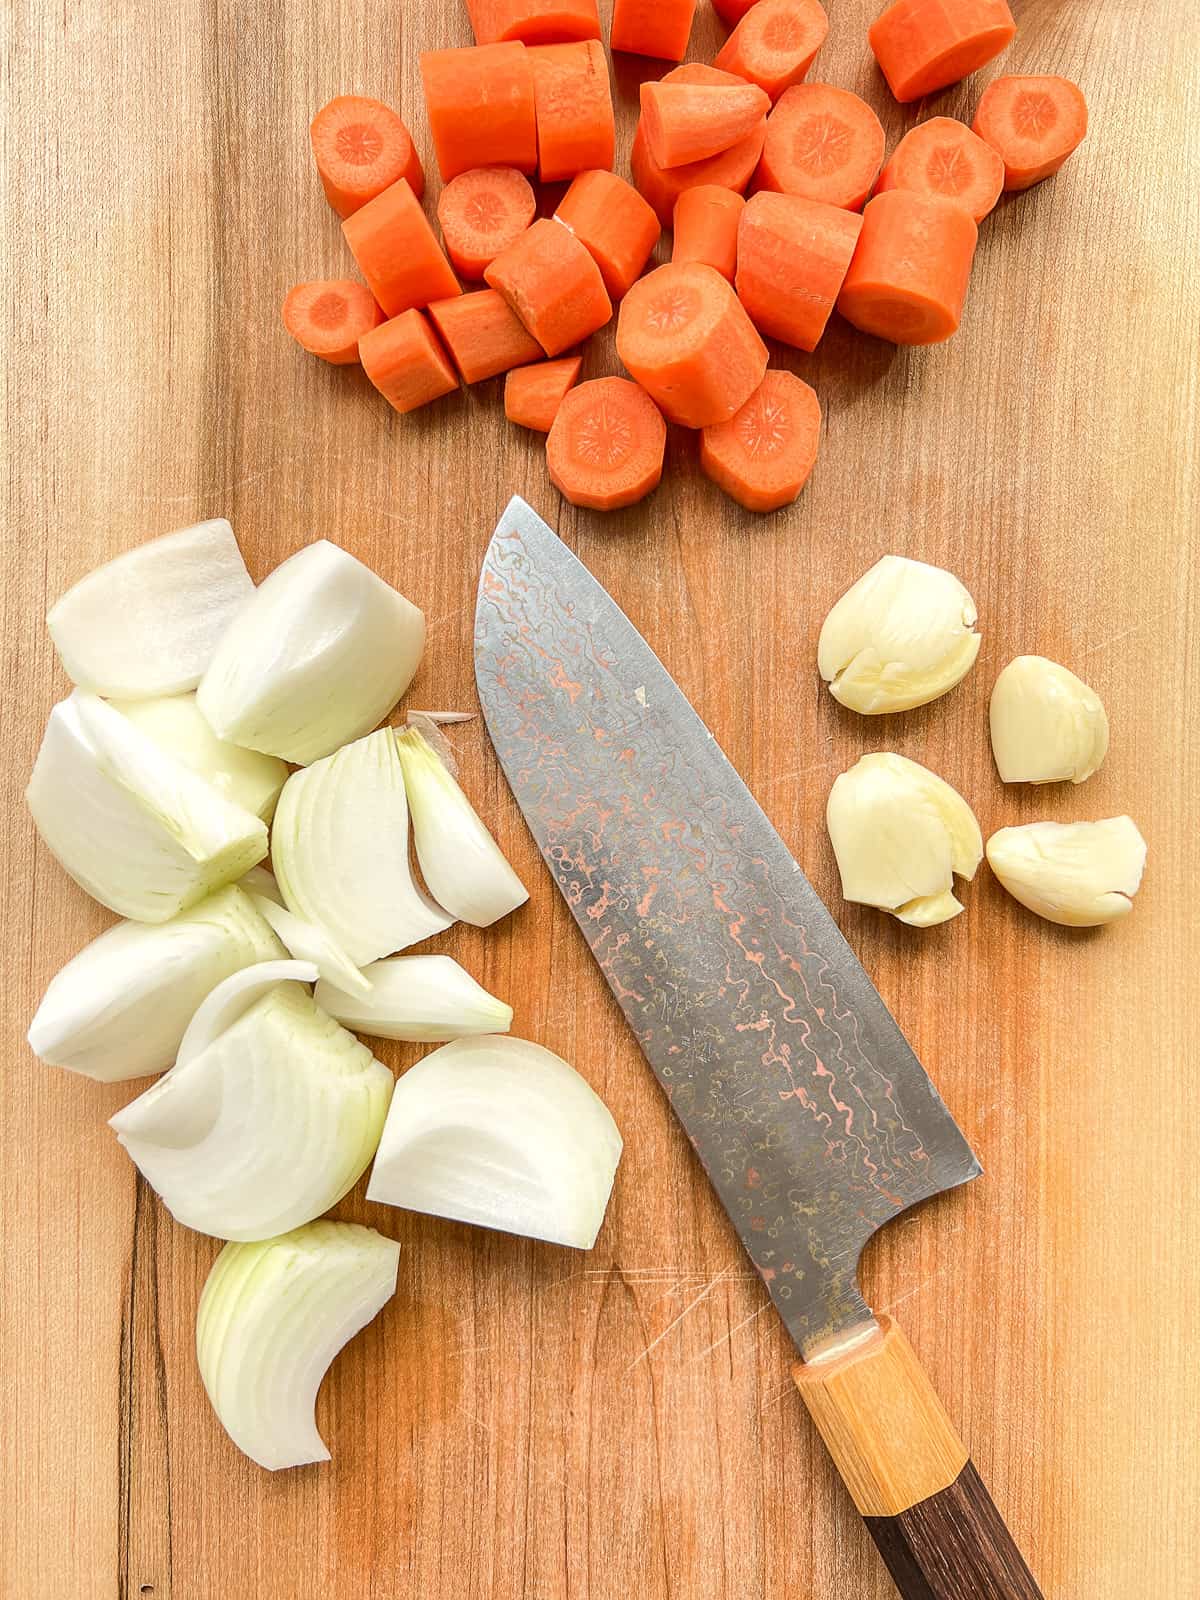 An image of chopped vegetables on a chopping board.